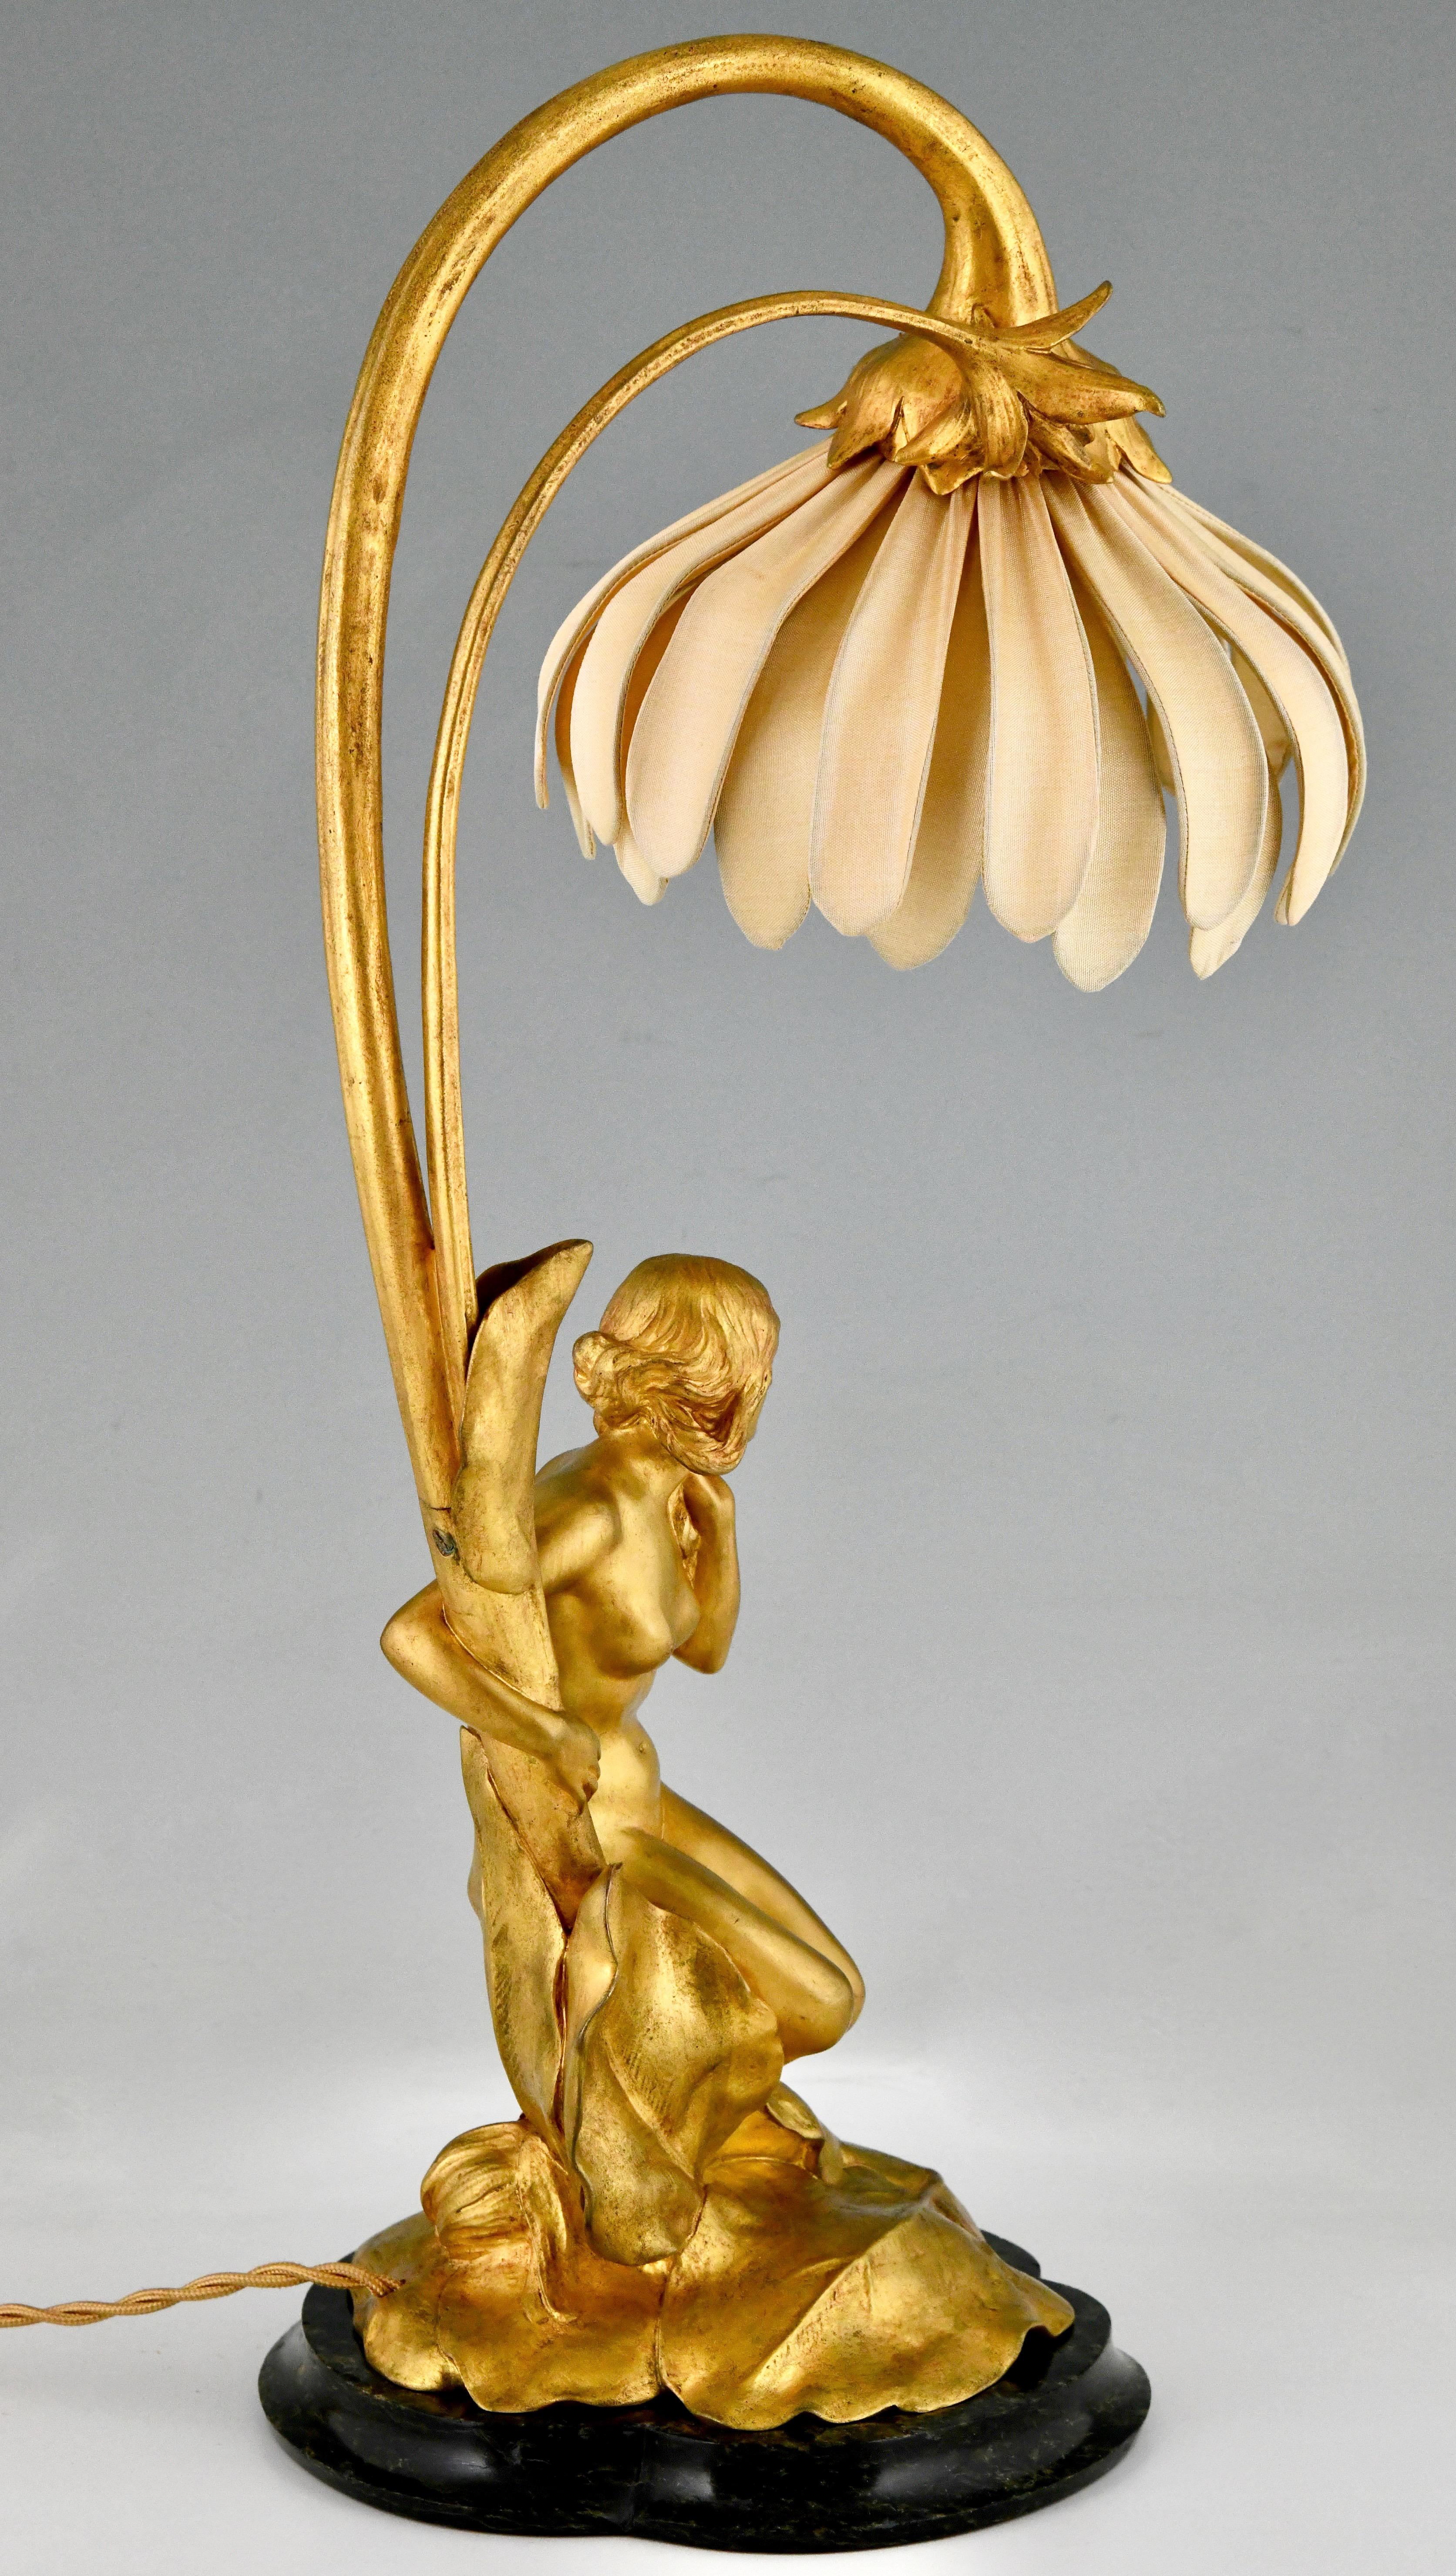 Early 20th Century Art Nouveau Gilt Bronze Lamp with Nude by Maurice Bouval, France 1906